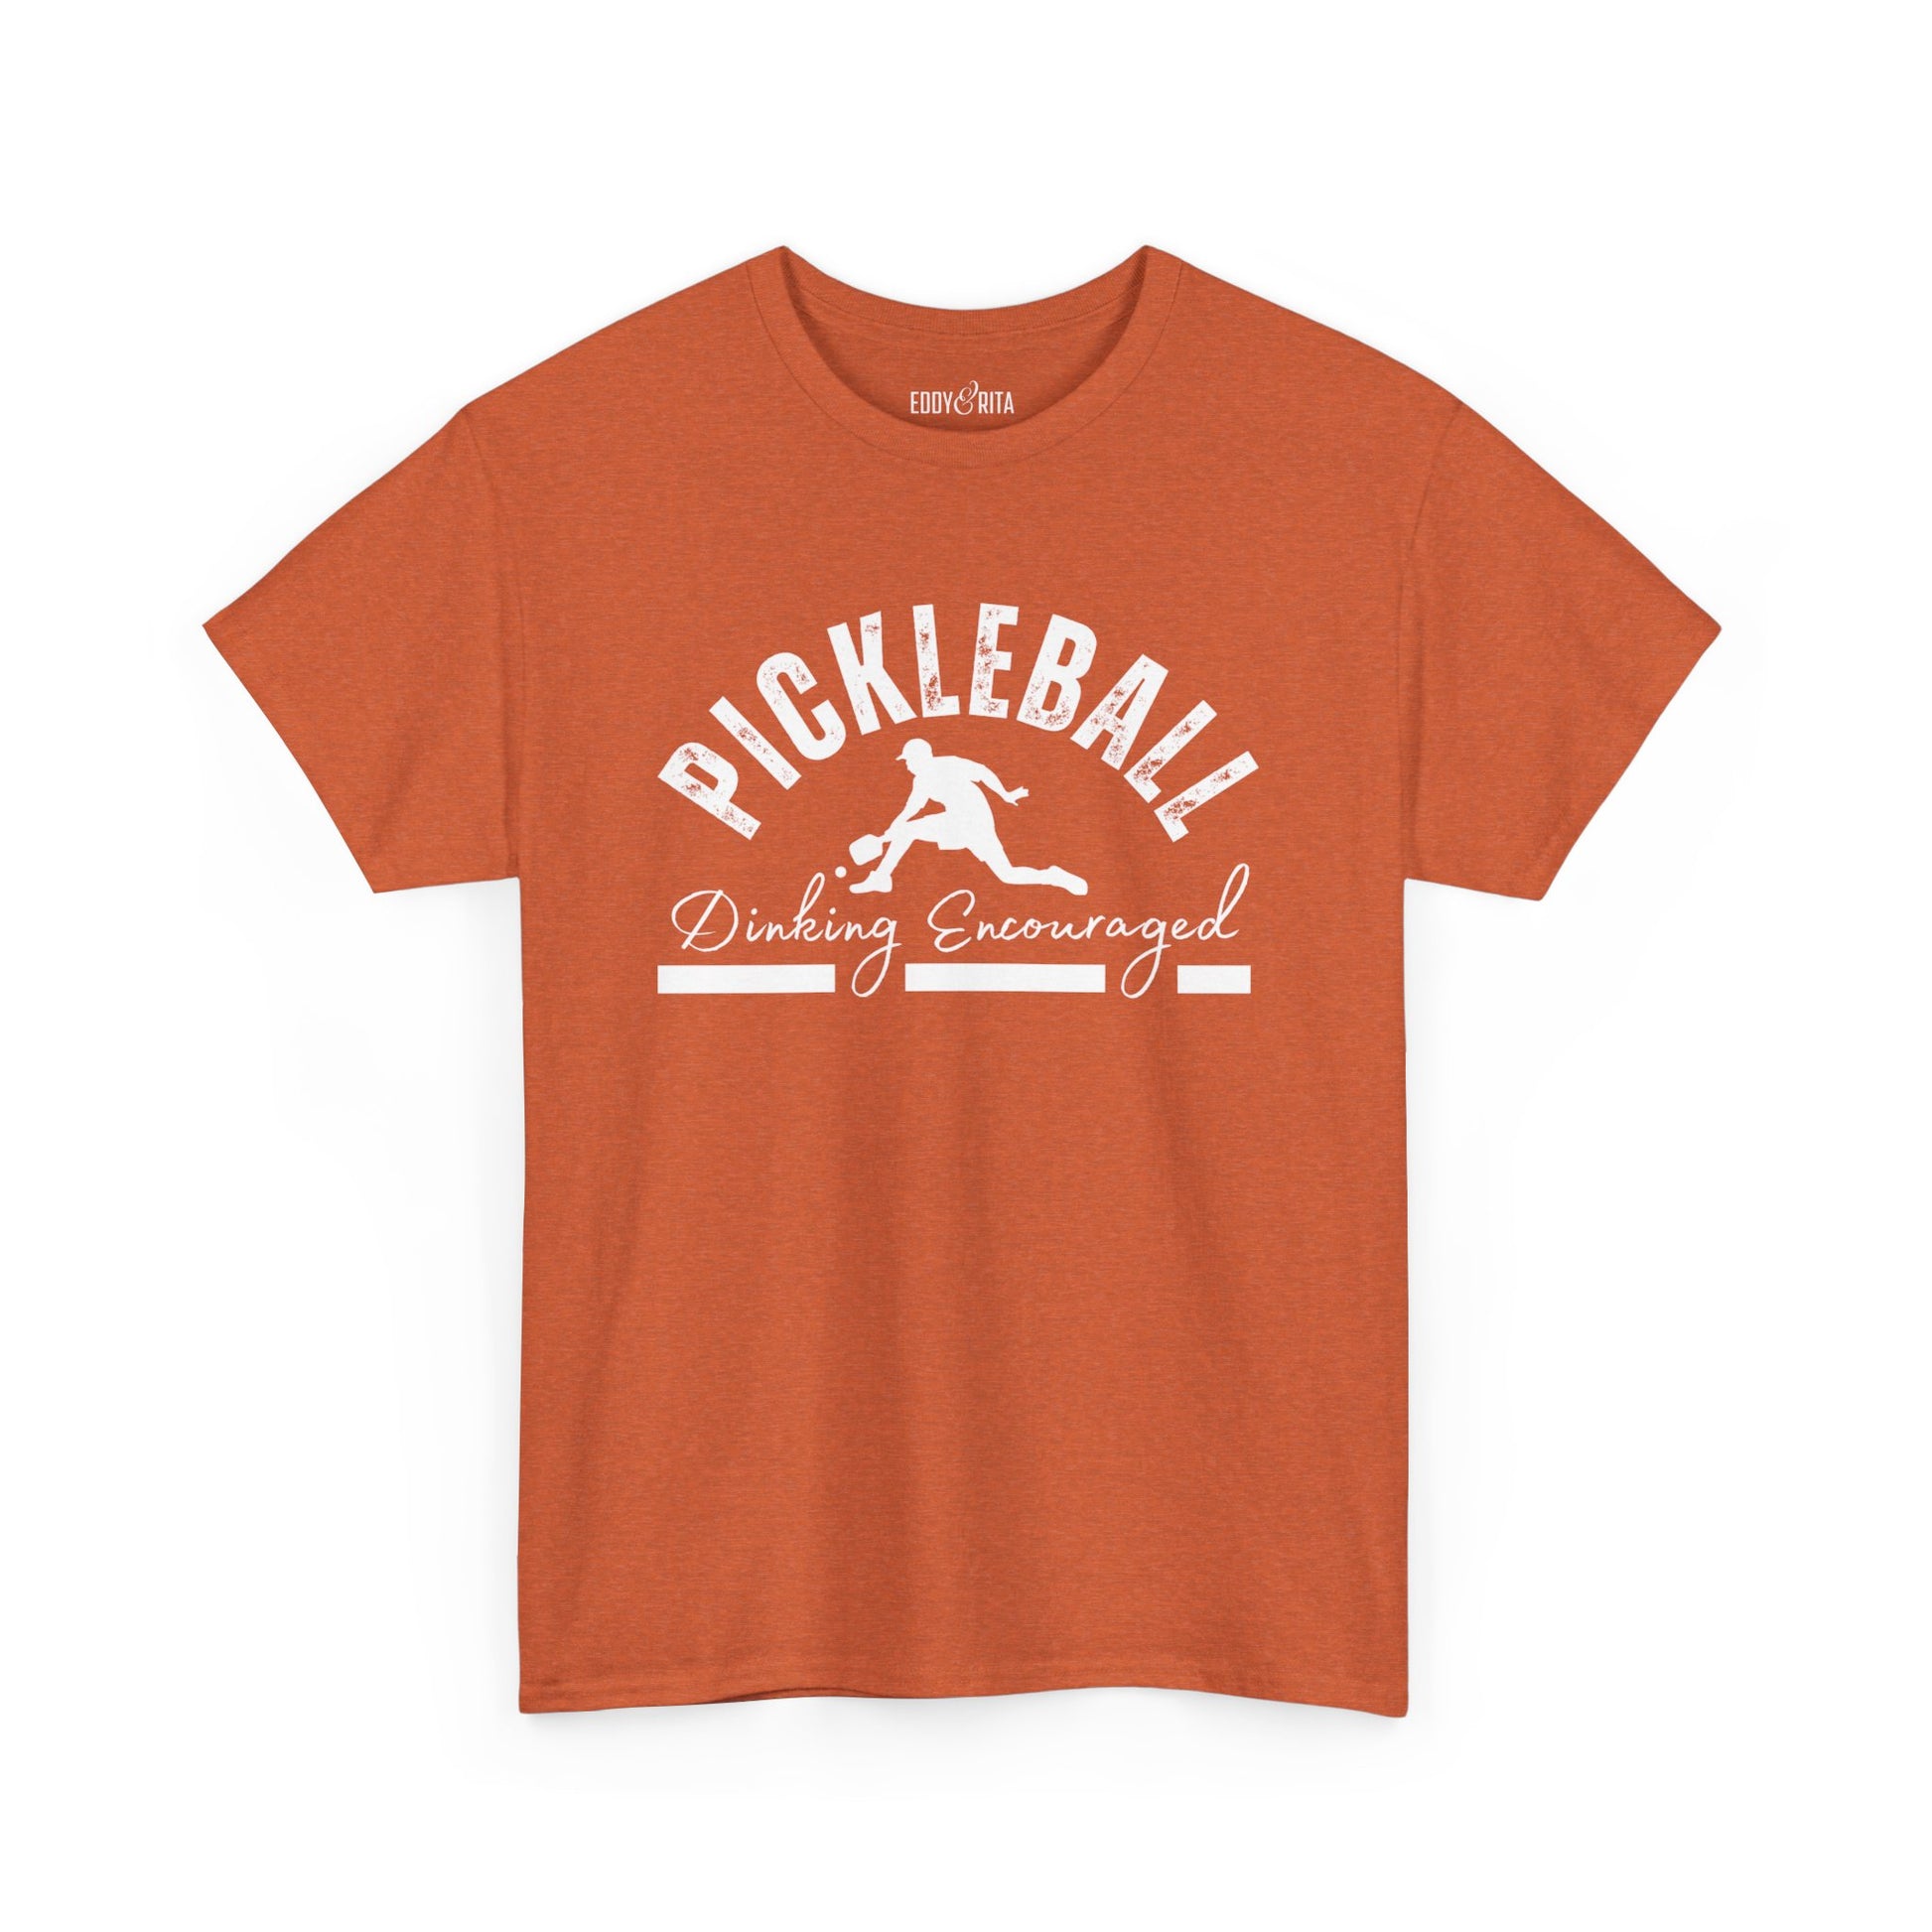 Eddy and Rita Men's Heavy Cotton T-Shirt - "Pickleball Dinking Encouraged" Graphic Tee for Pickleball Enthusiasts